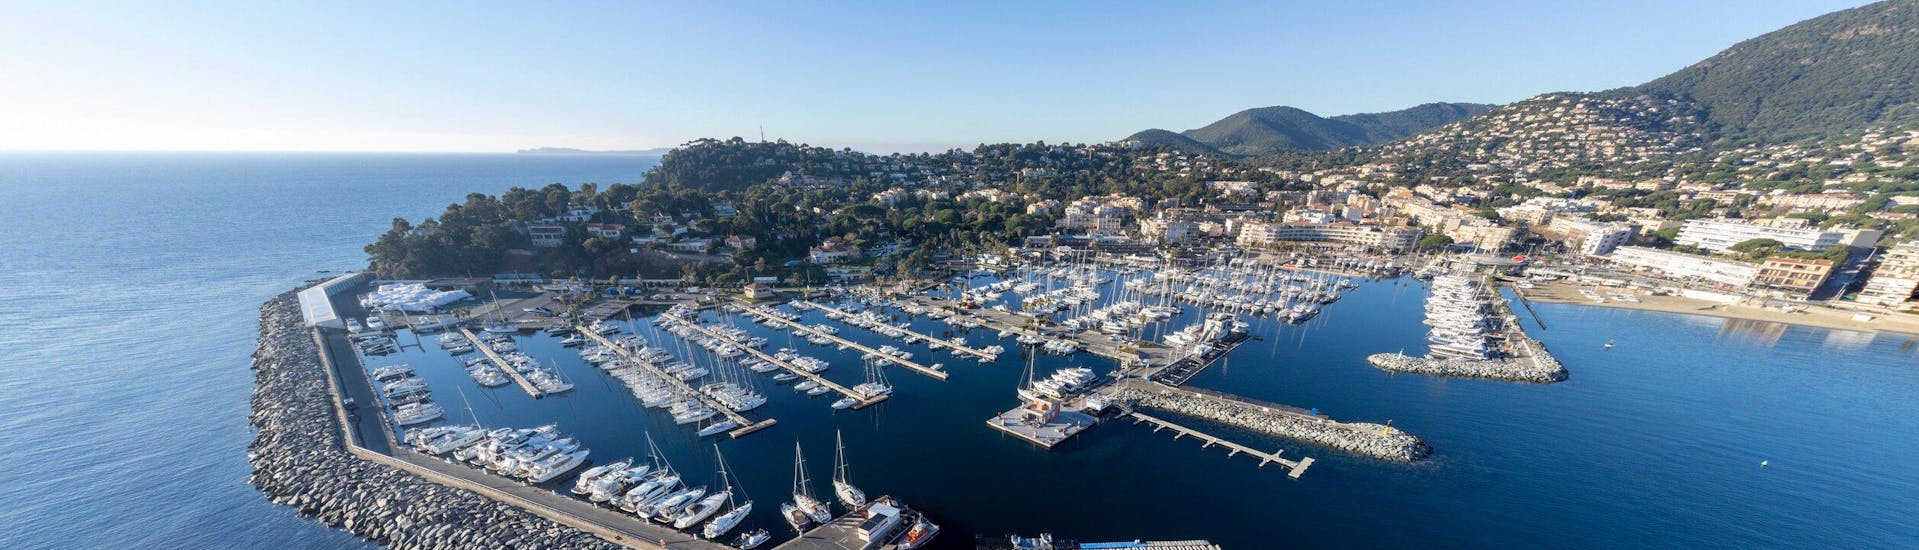 View of the port of Cavalaire sur Mer in France.